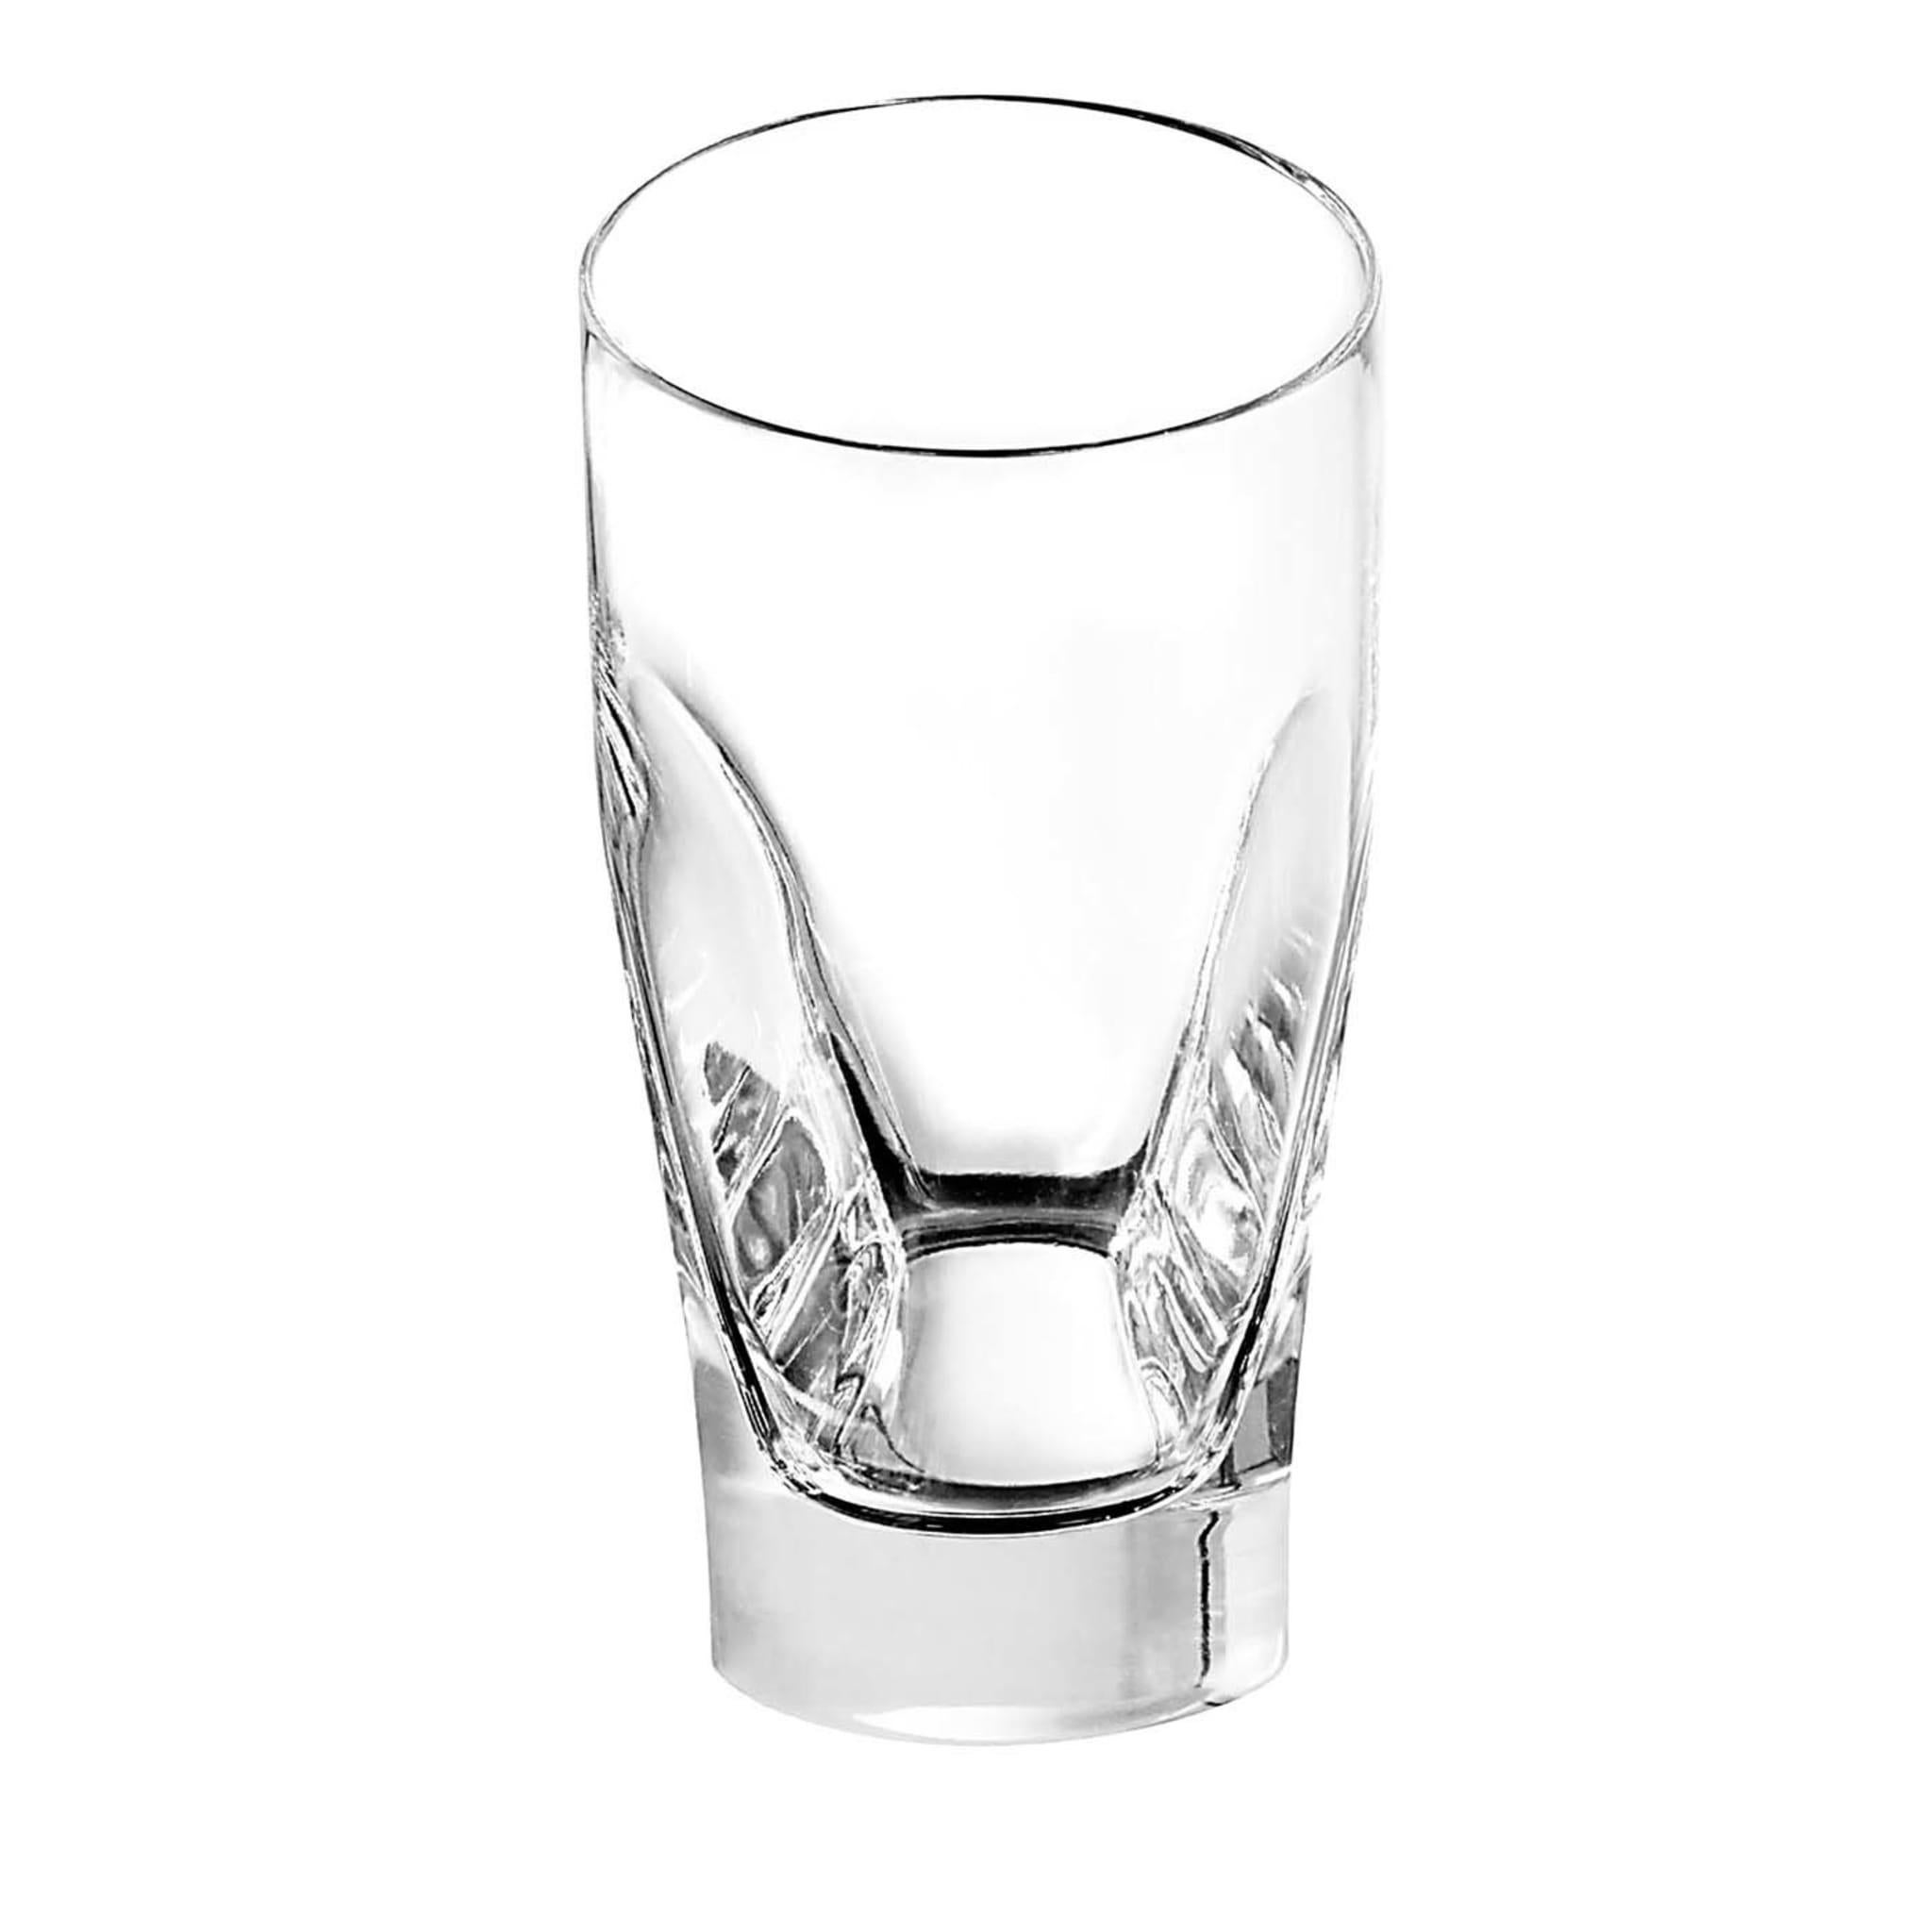 Part of the Conversazione collection, this set of four highball glasses is a dynamic and sophisticated accent to display on a modern dining table, especially when combined with the others of the same series for a cohesive effect. Crafted of crystal,